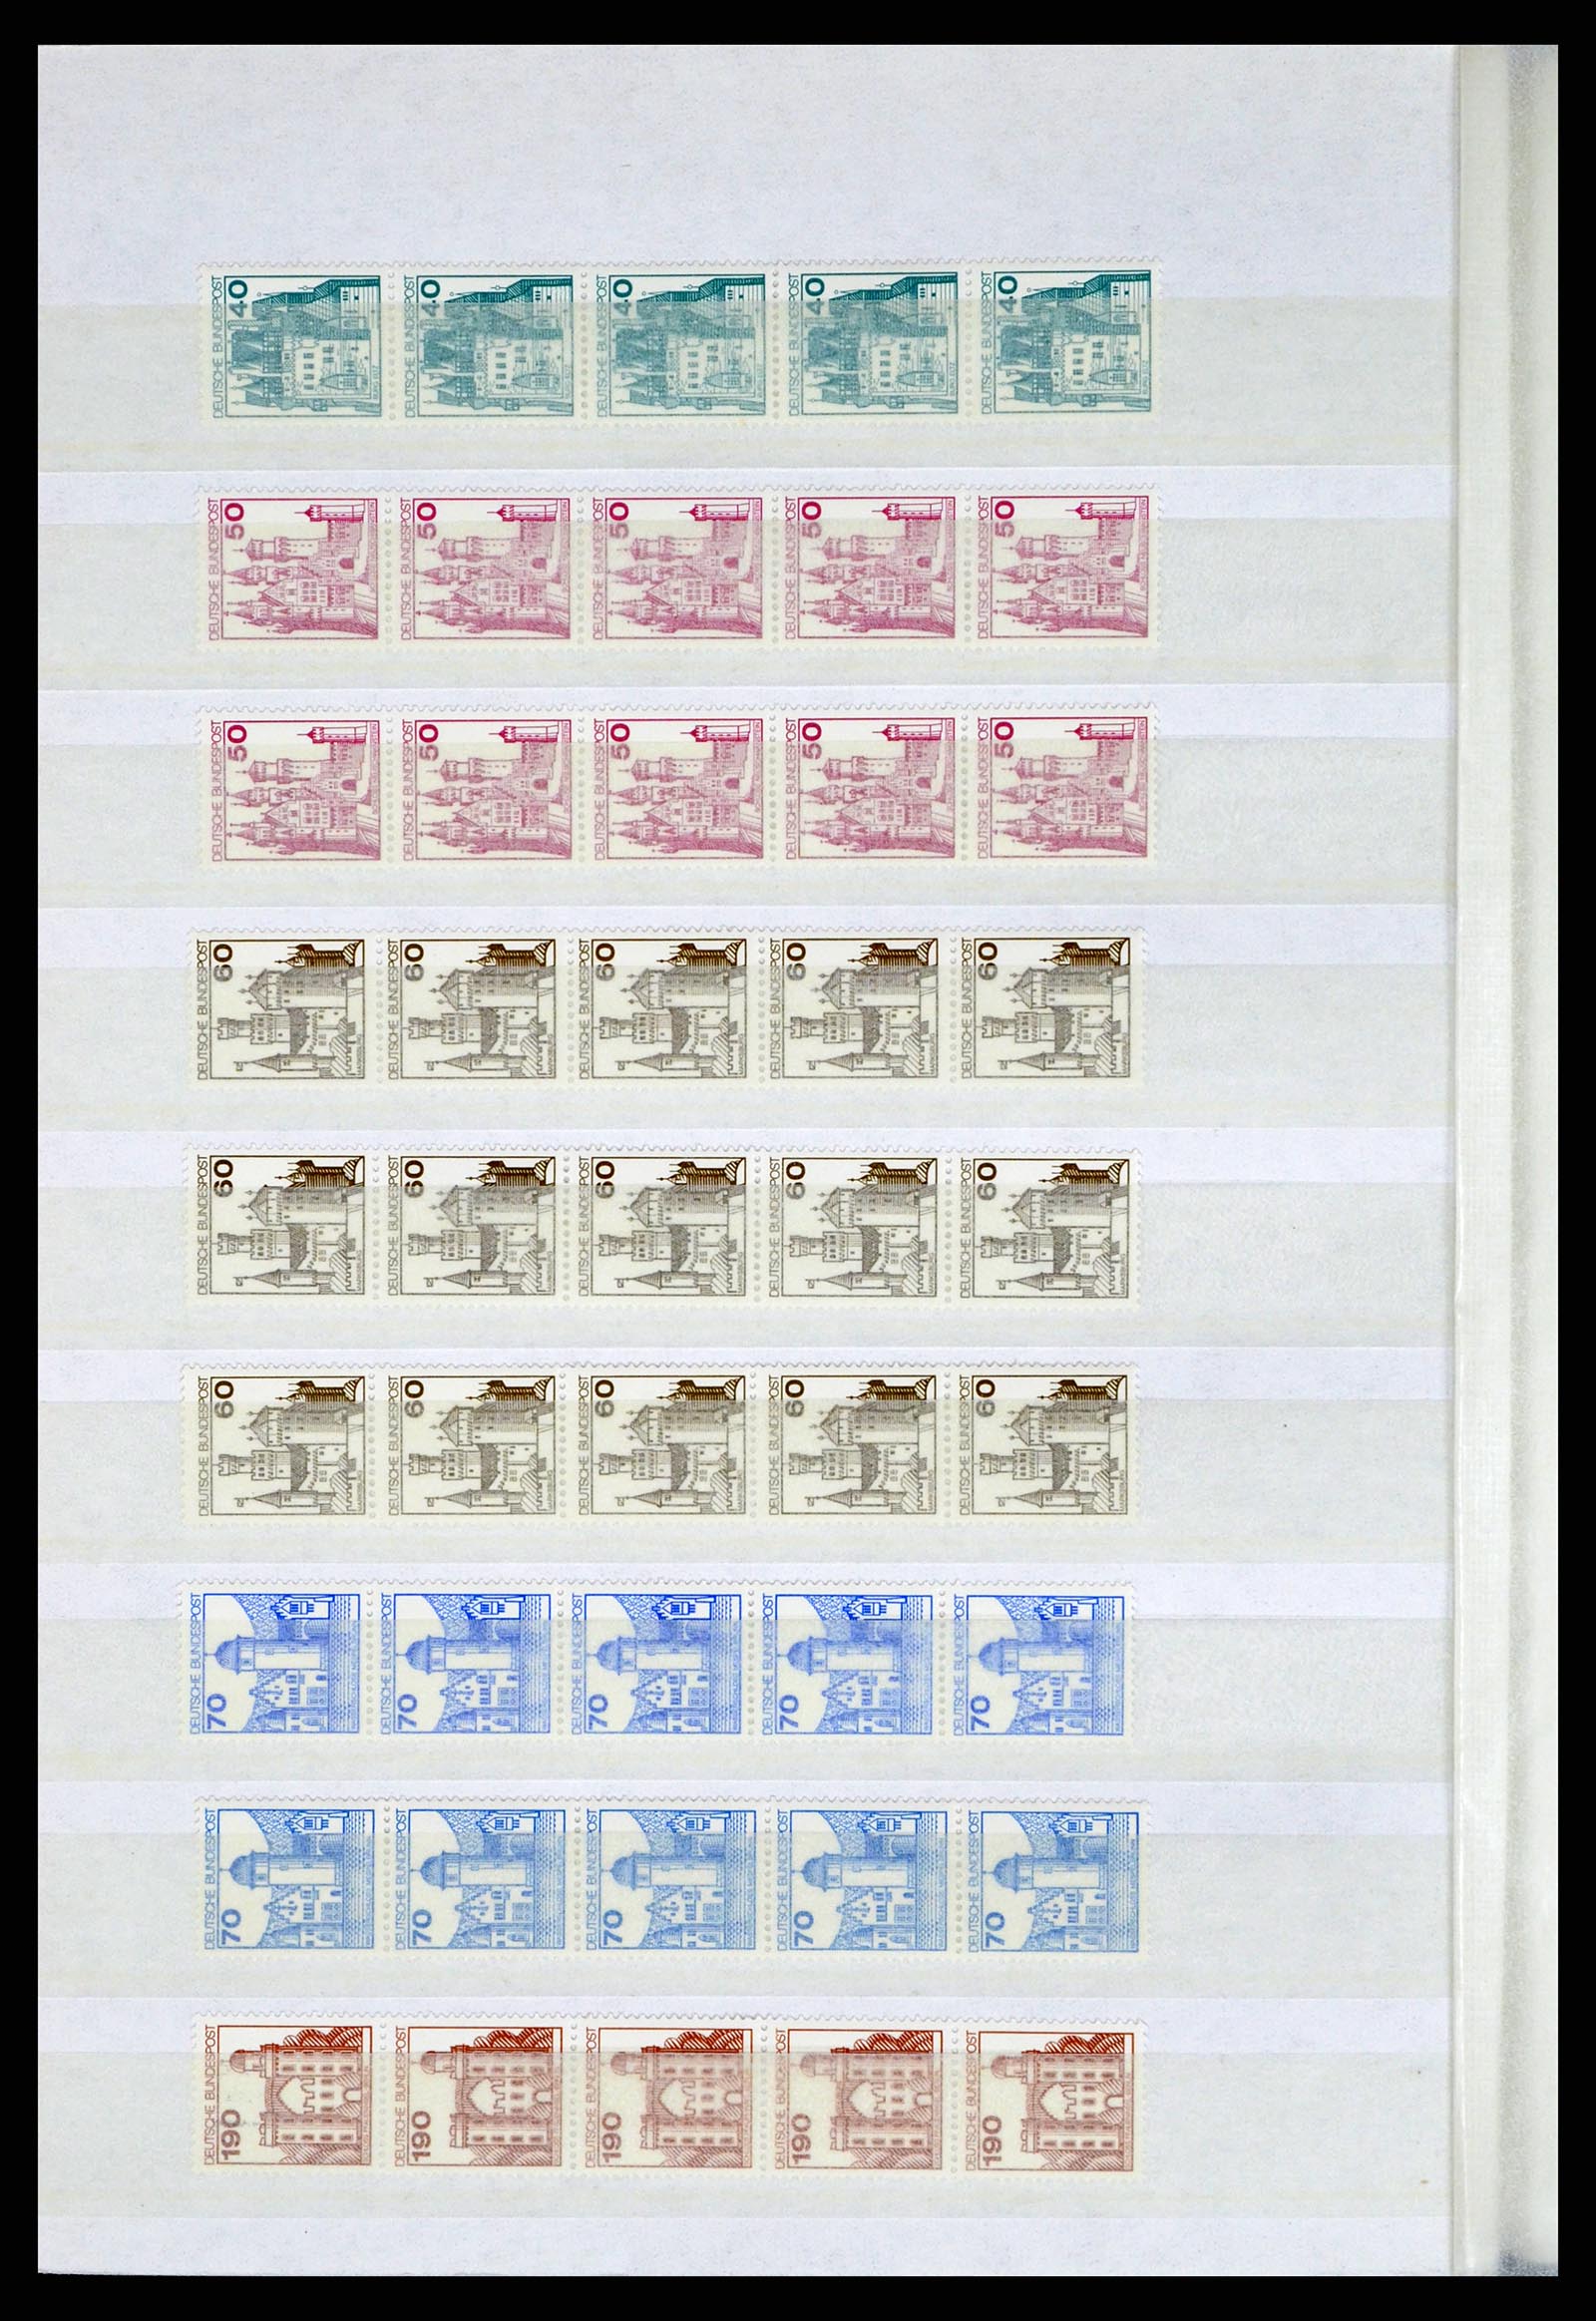 37354 064 - Stamp collection 37354 Bundespost and Berlin 1955-2000.